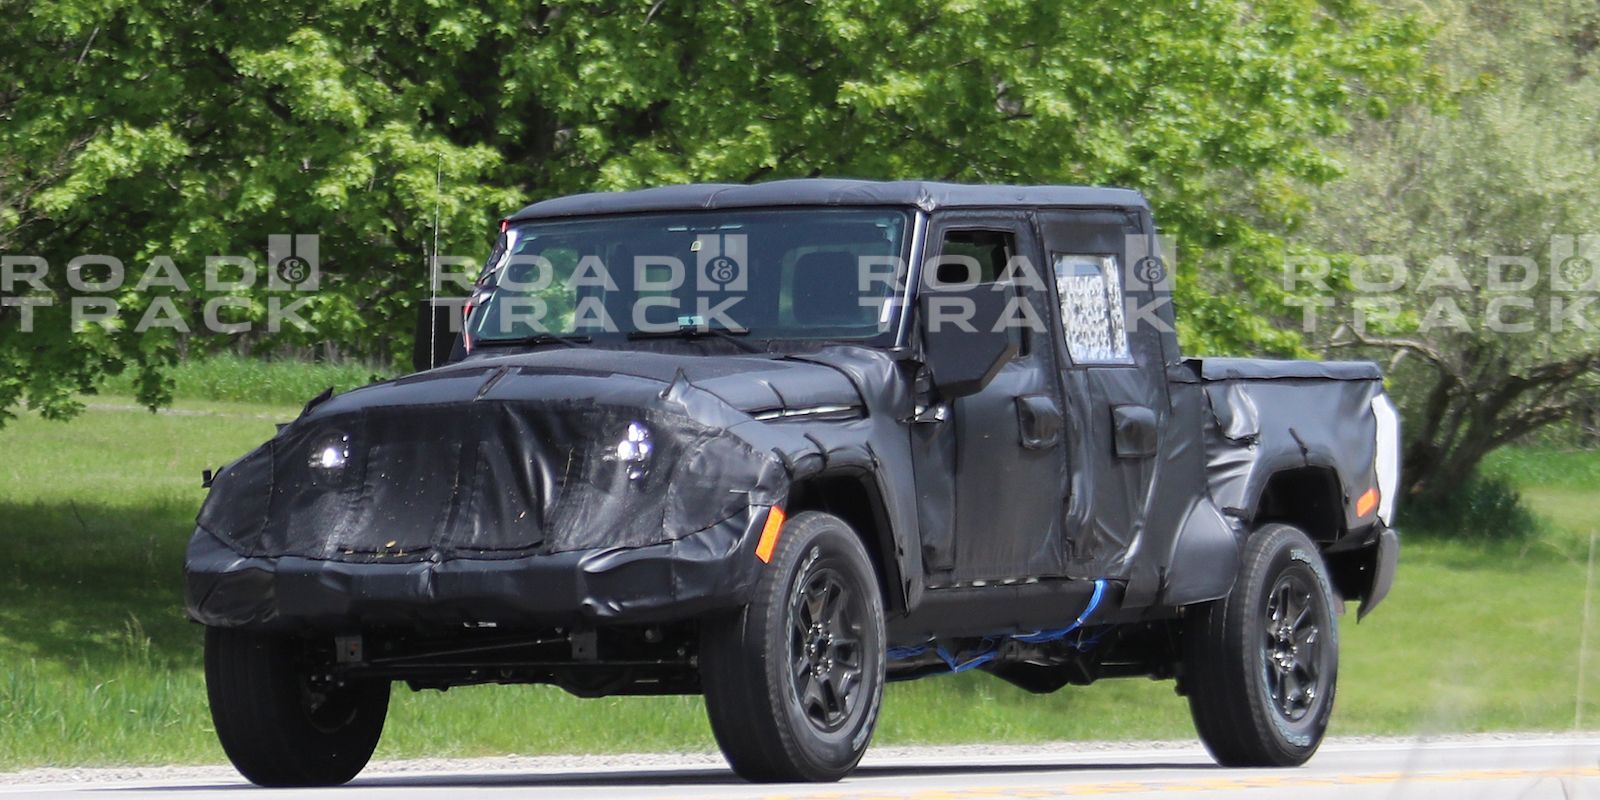 2019 Jeep Scrambler Soft Top Confirmed - Jeep Wrangler Pickup Will Have a  Soft-Top